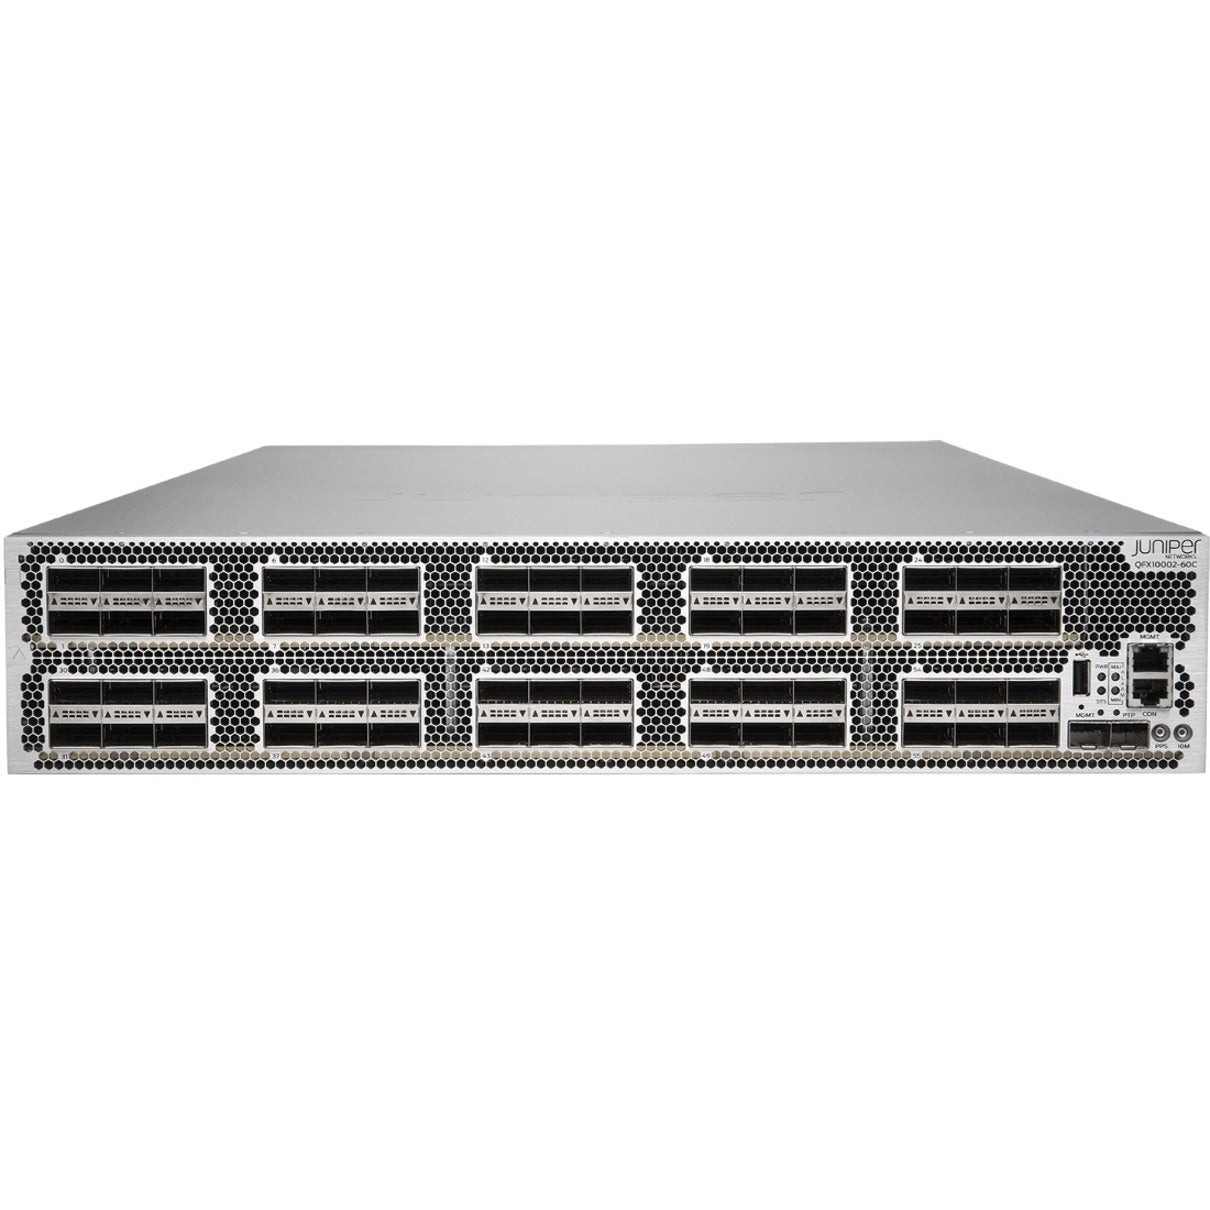 Juniper QFX10002-60C Layer 3 Switch, 100 Gigabit Ethernet, 60 Expansion Slots, Power Supply Included